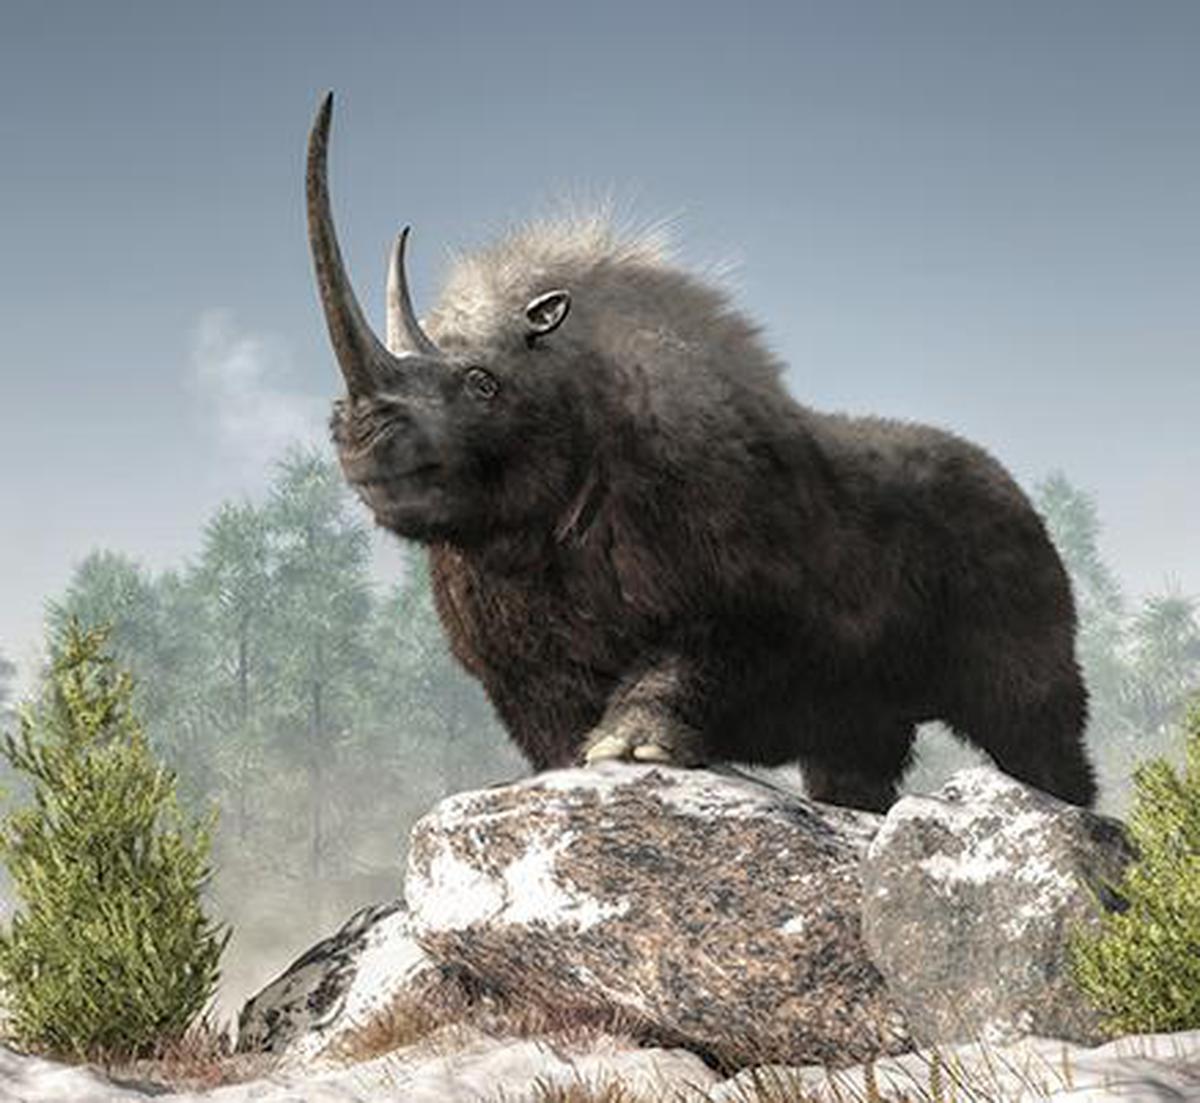 Woolly rhino from the Ice Age found in Russia - The Hindu